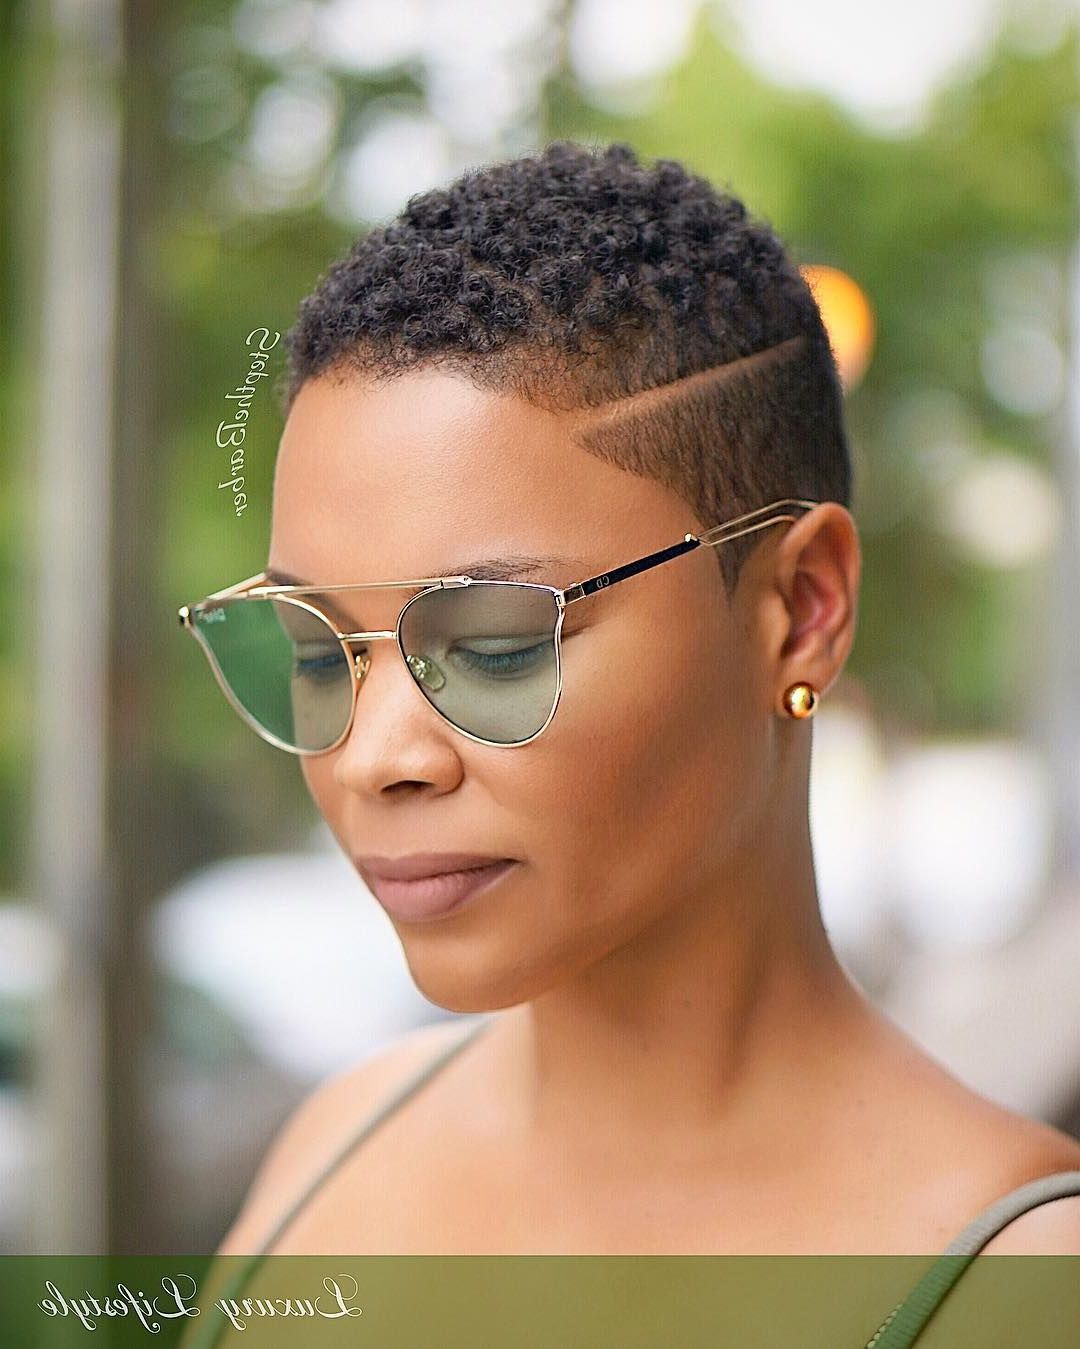 Tapered Haircut With A Disconnected Side Part. Twa, Black Woman Intended For Edgy Short Haircuts For Black Women (Photo 18 of 25)